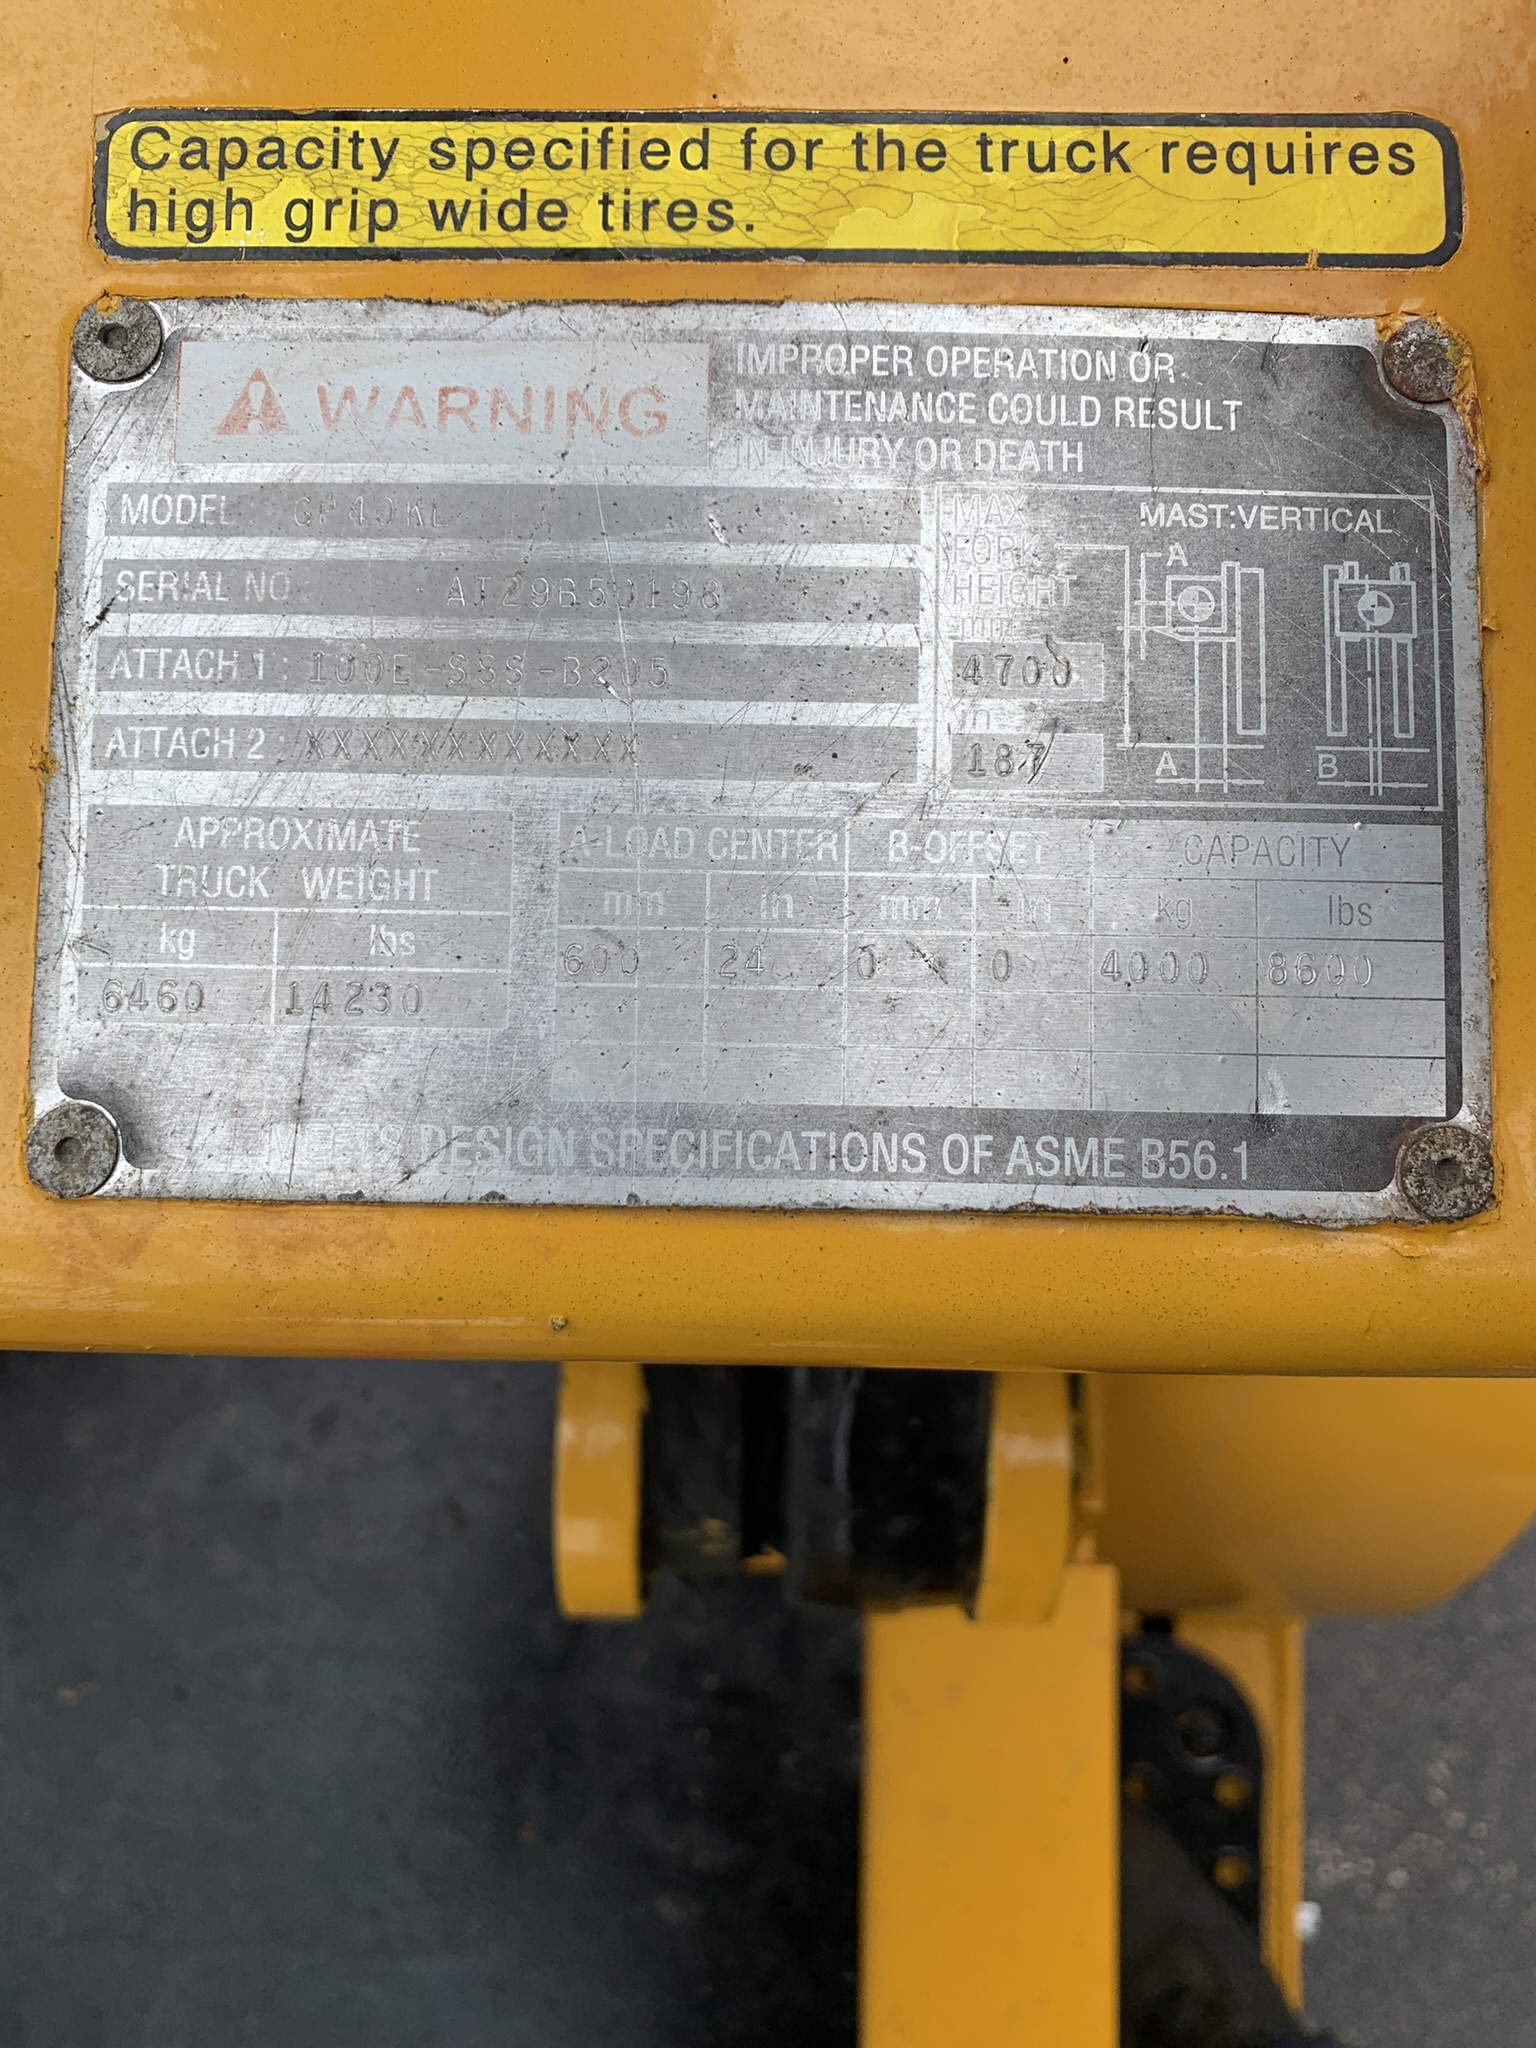 Model GP40KL yellow caterpillar forklift with serial number AT29B50198 for sale